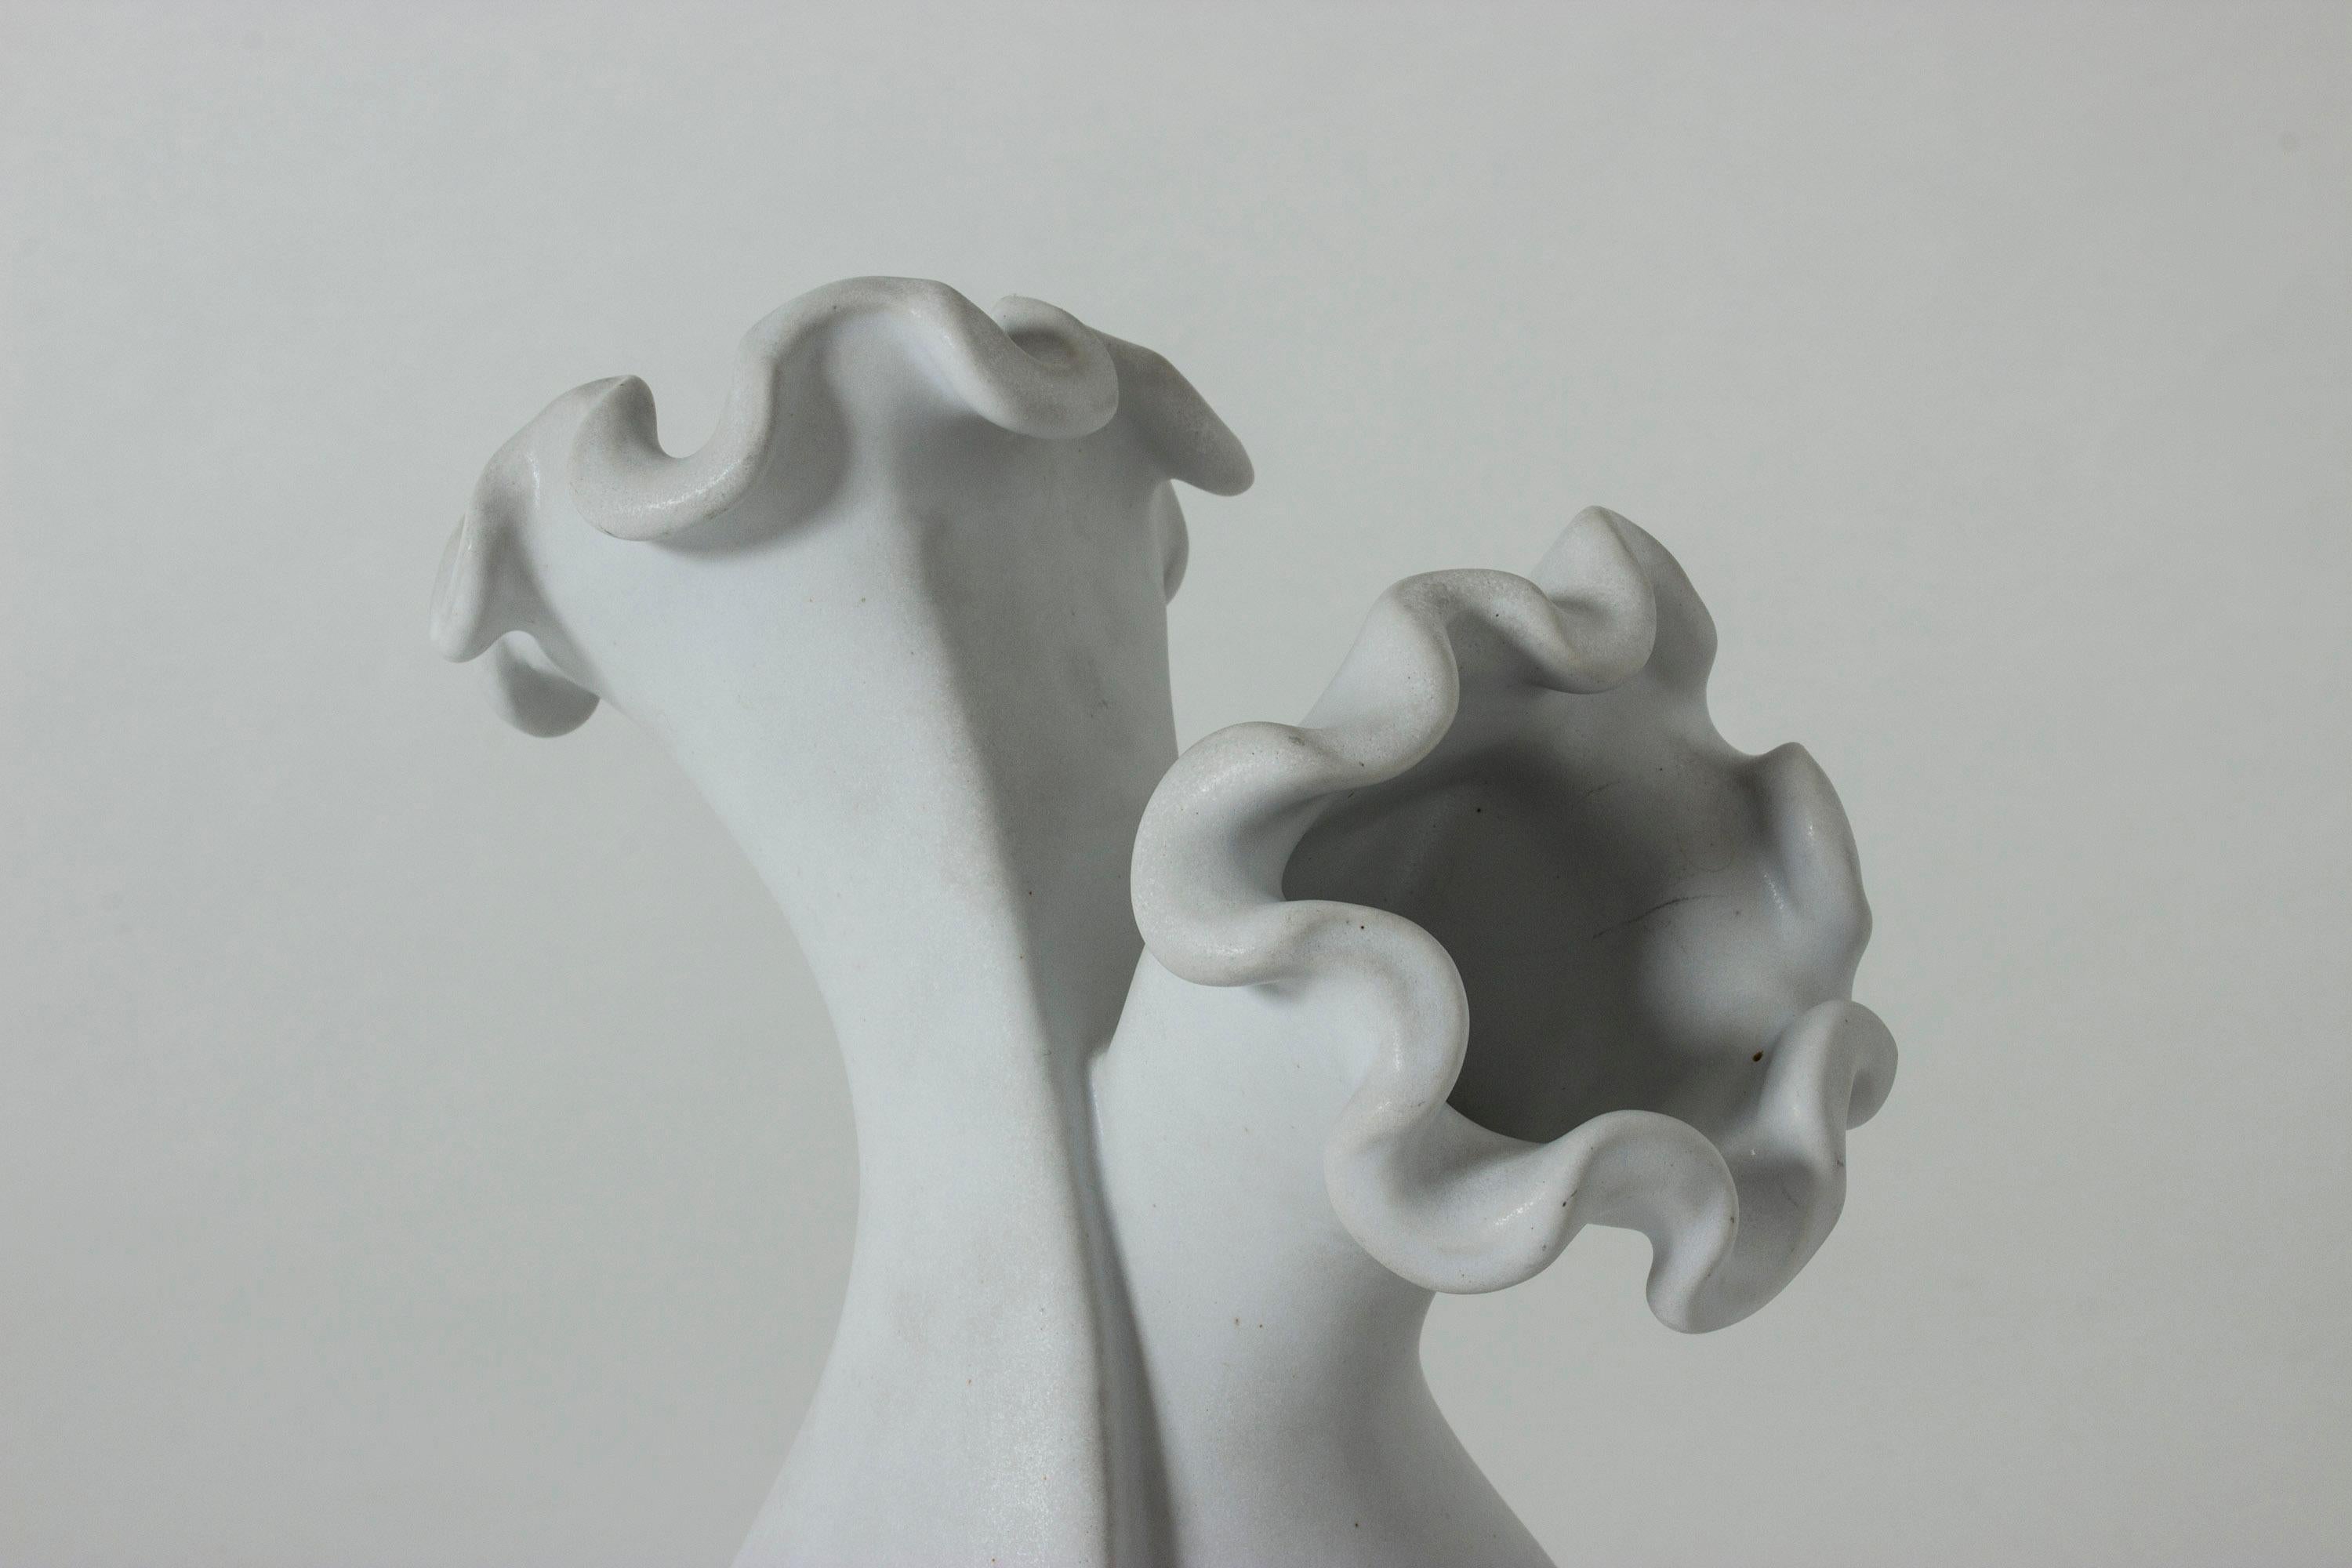 vase with multiple openings